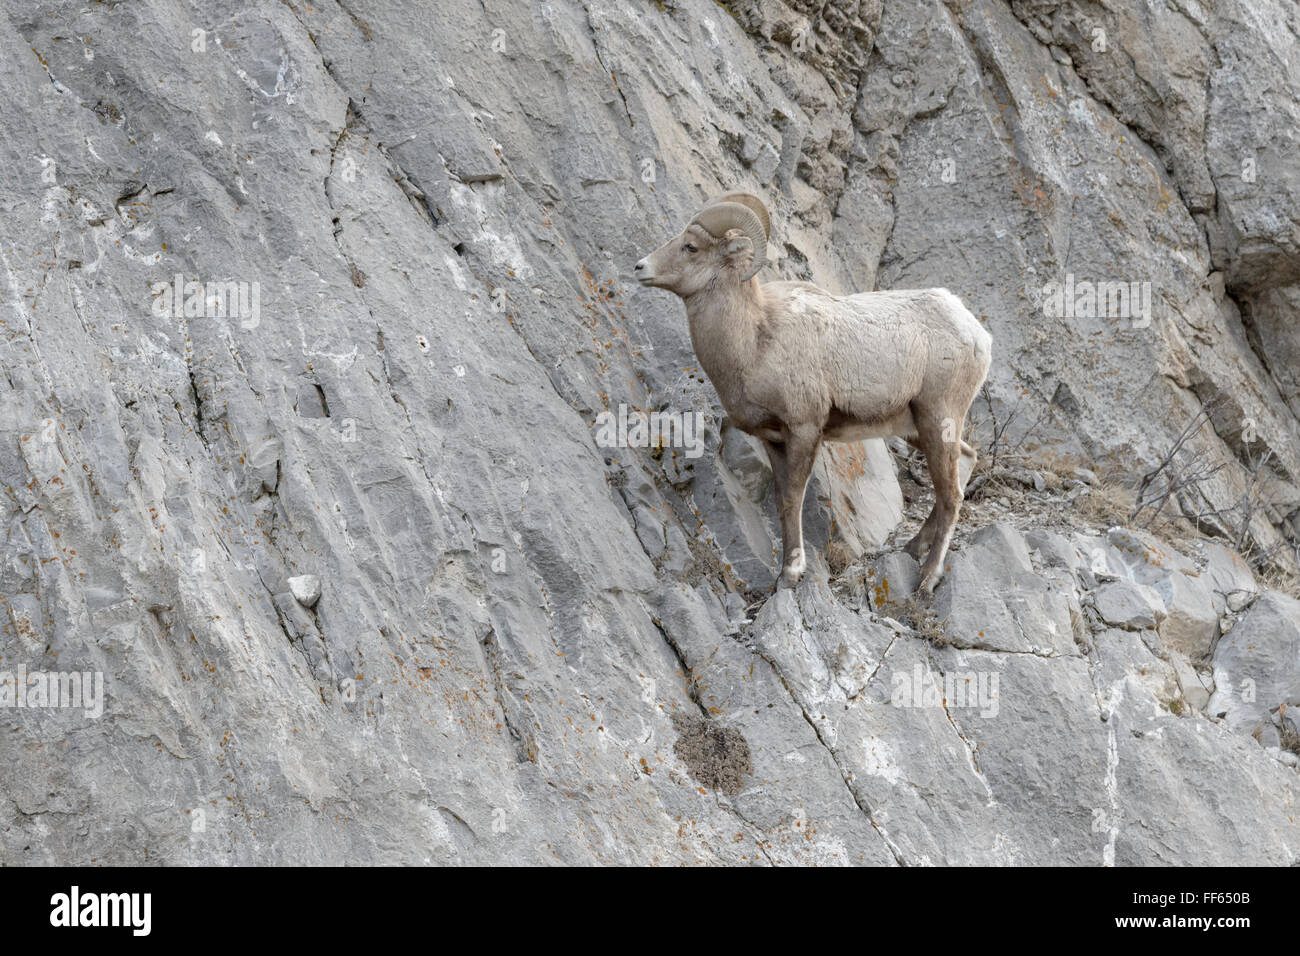 Bighorn Sheep (Ovis canadensis) male, ram, standing on cliff, National Elk refuge, Jackson, Wyoming, USA. Stock Photo